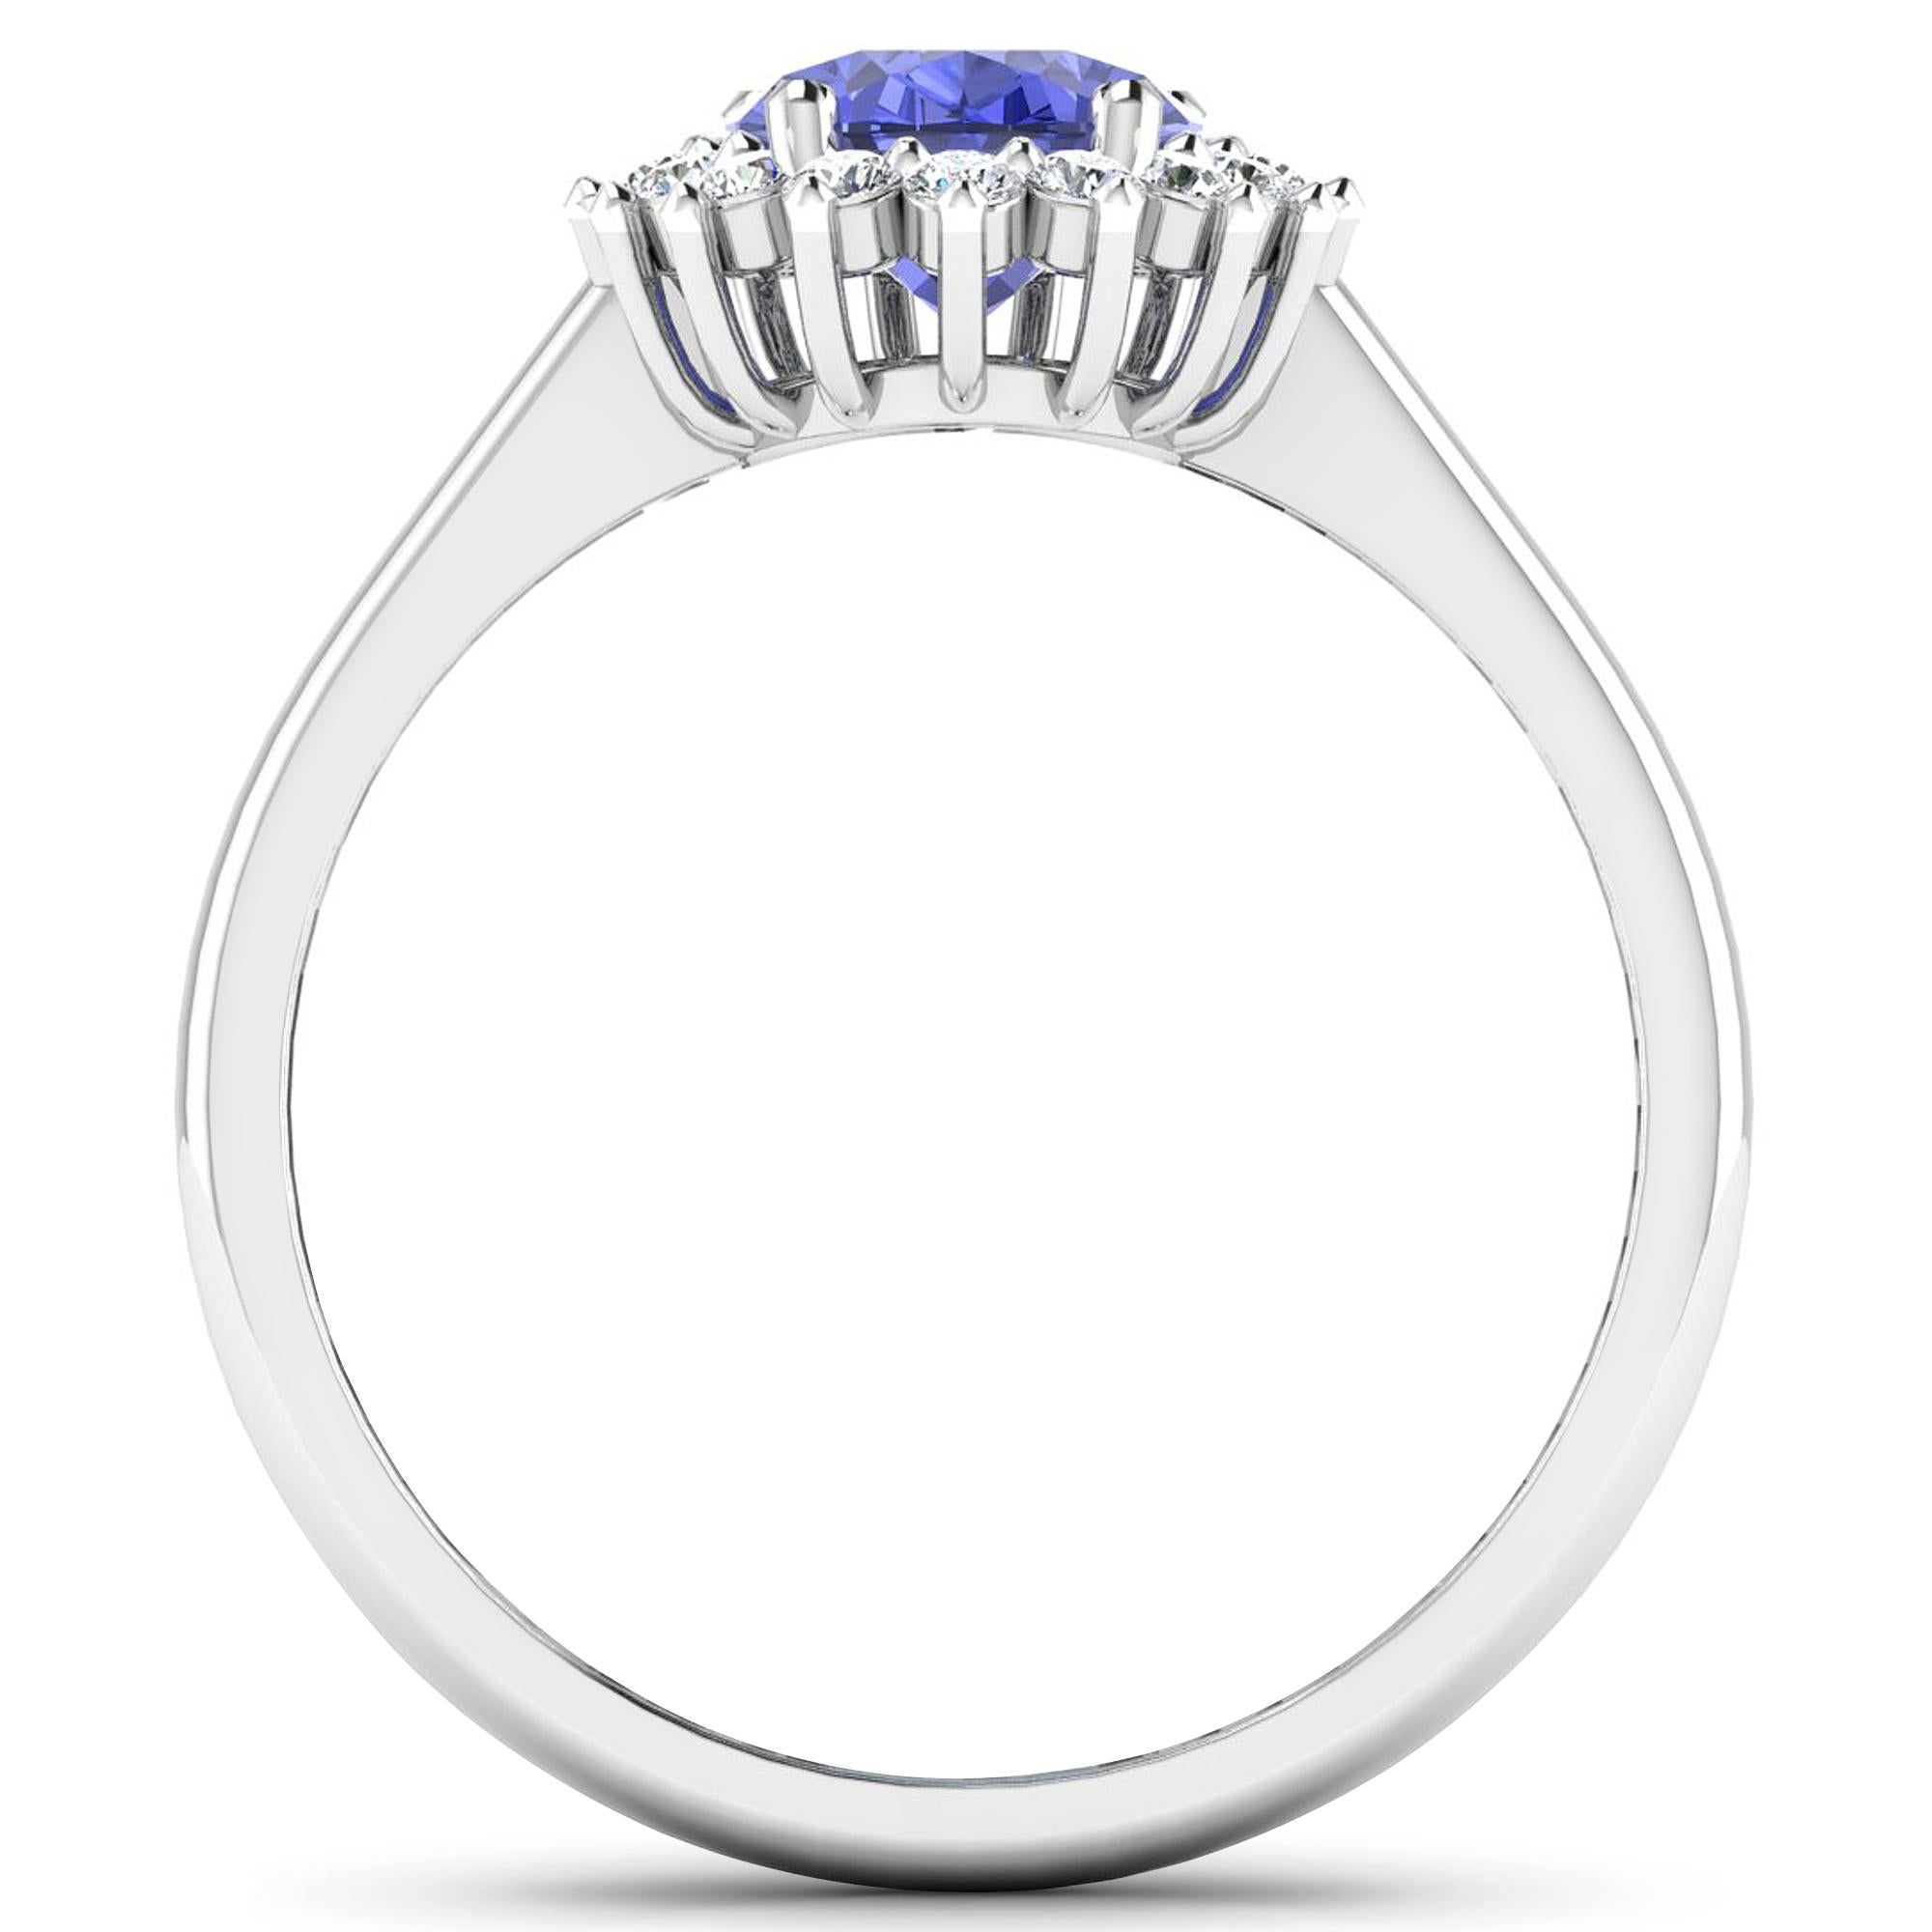 14Kt Gold Tanzanite & Diamond Engagement Ring, 1.80ctw

Center Stone Details:
Stone: Tanzanite
Shape: Oval
Size: 9x7mm
Weight: 1.60 carat

Diamond Details:
Shape: Round Brilliant (20)
Carat Weight: 0.22 carats
Quality, Color: I1-I2, I

14K White